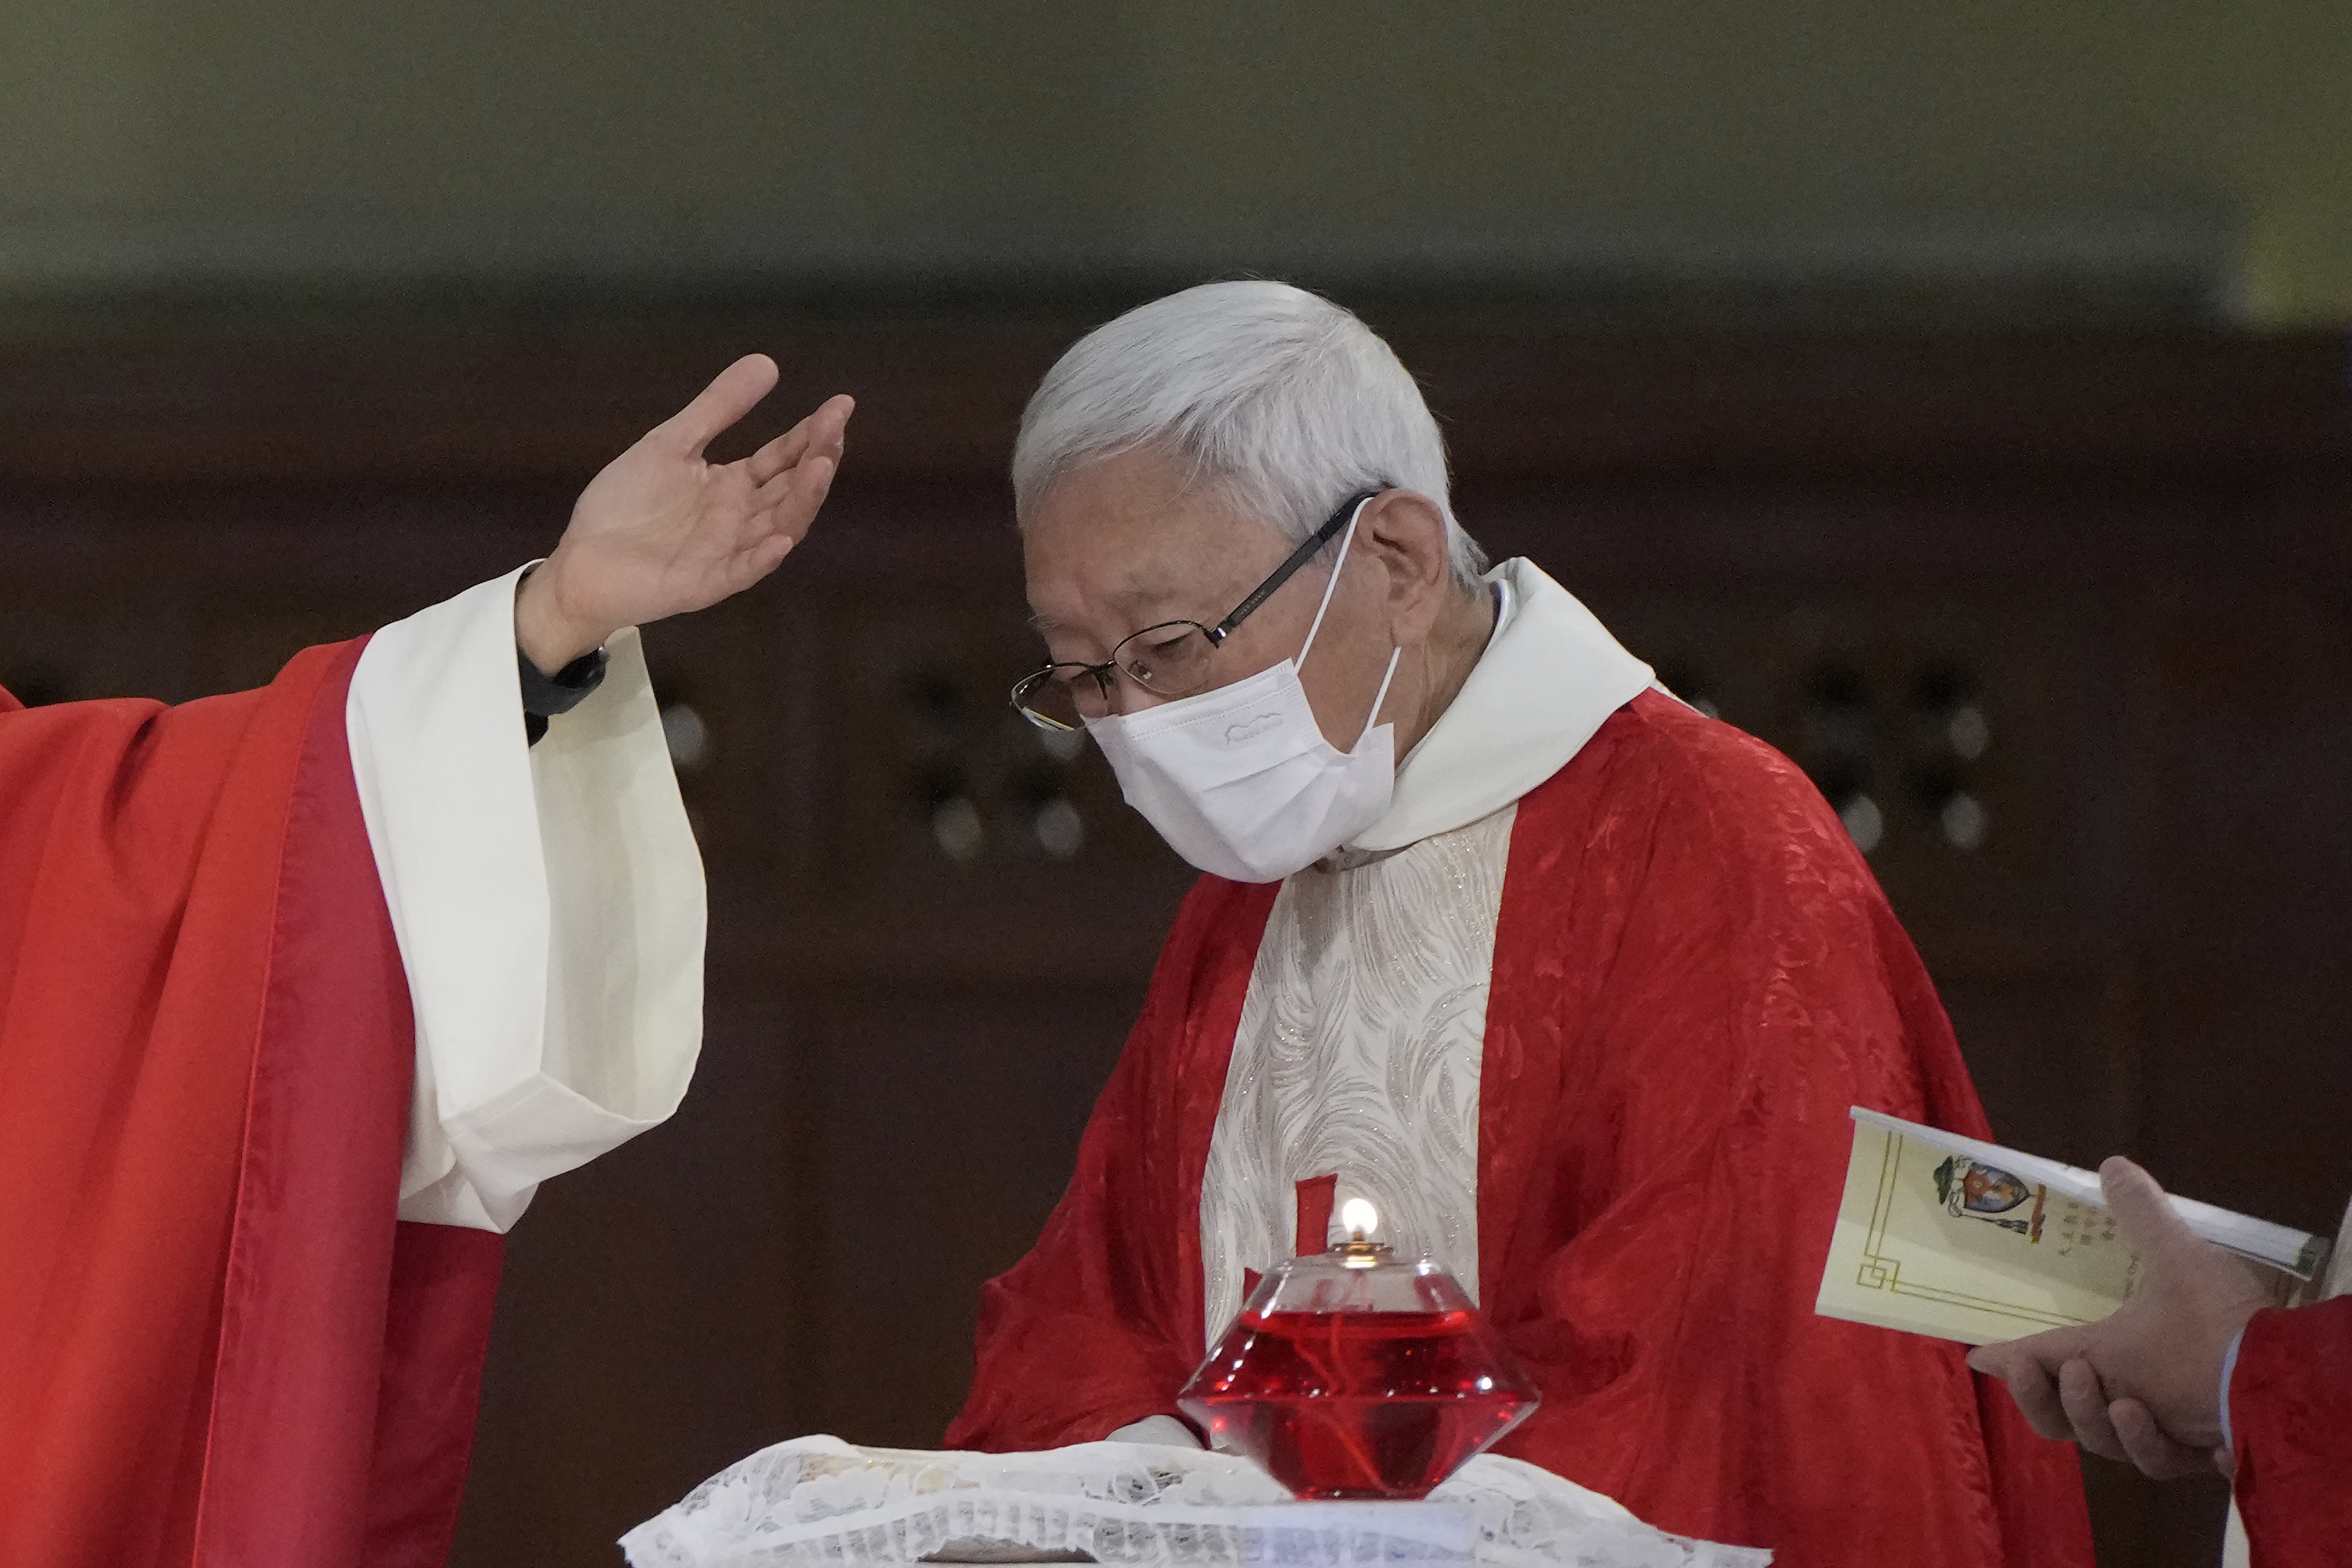 Retired archbishop of Hong Kong Joseph Zen, attends the episcopal ordination ceremony of Bishop Stephen Chow, in Hong Kong, Saturday, Dec. 4, 2021. (AP Photo/Kin Cheung)